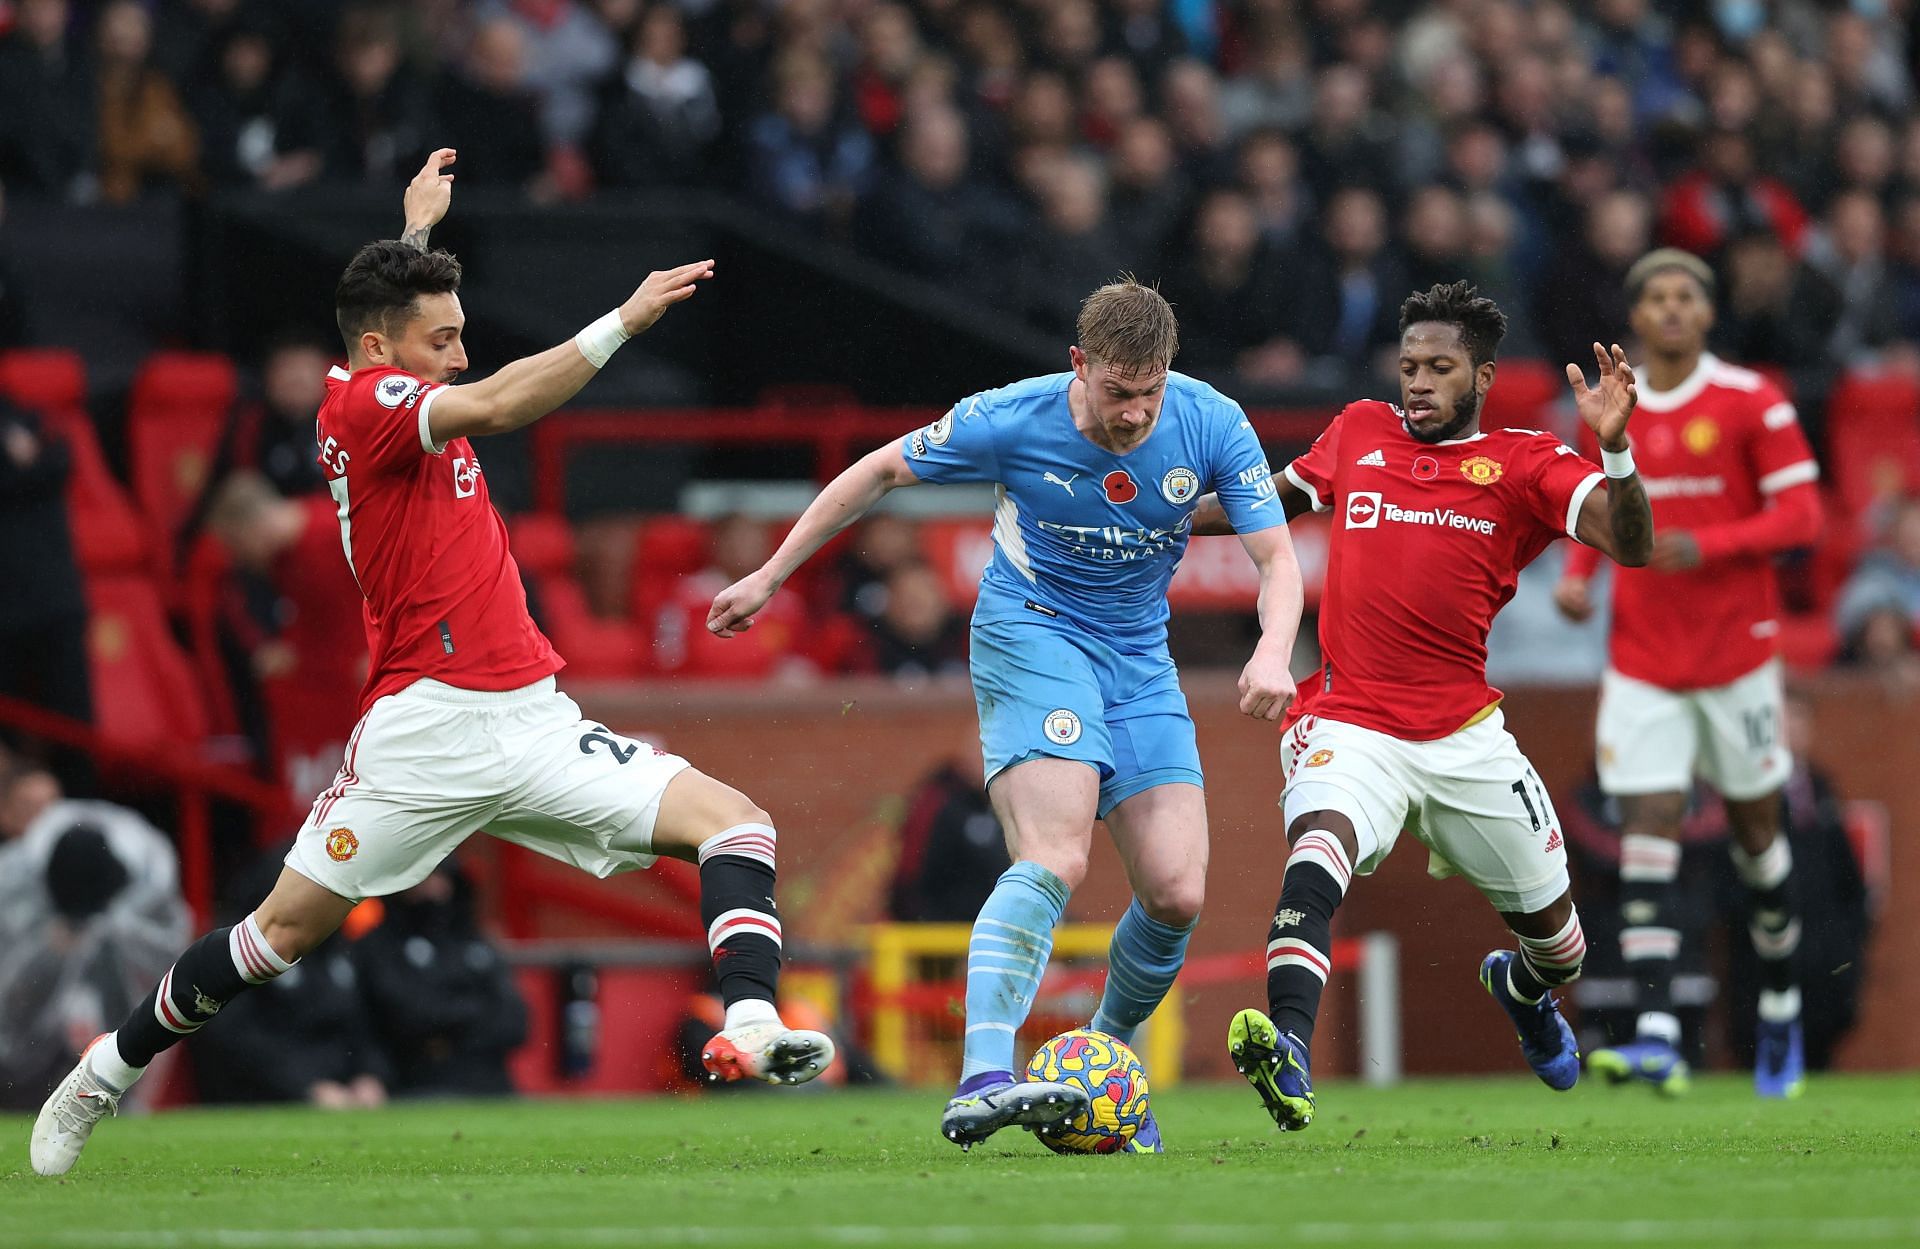 Manchester City vs Manchester United Prediction and Betting Tips - 6th